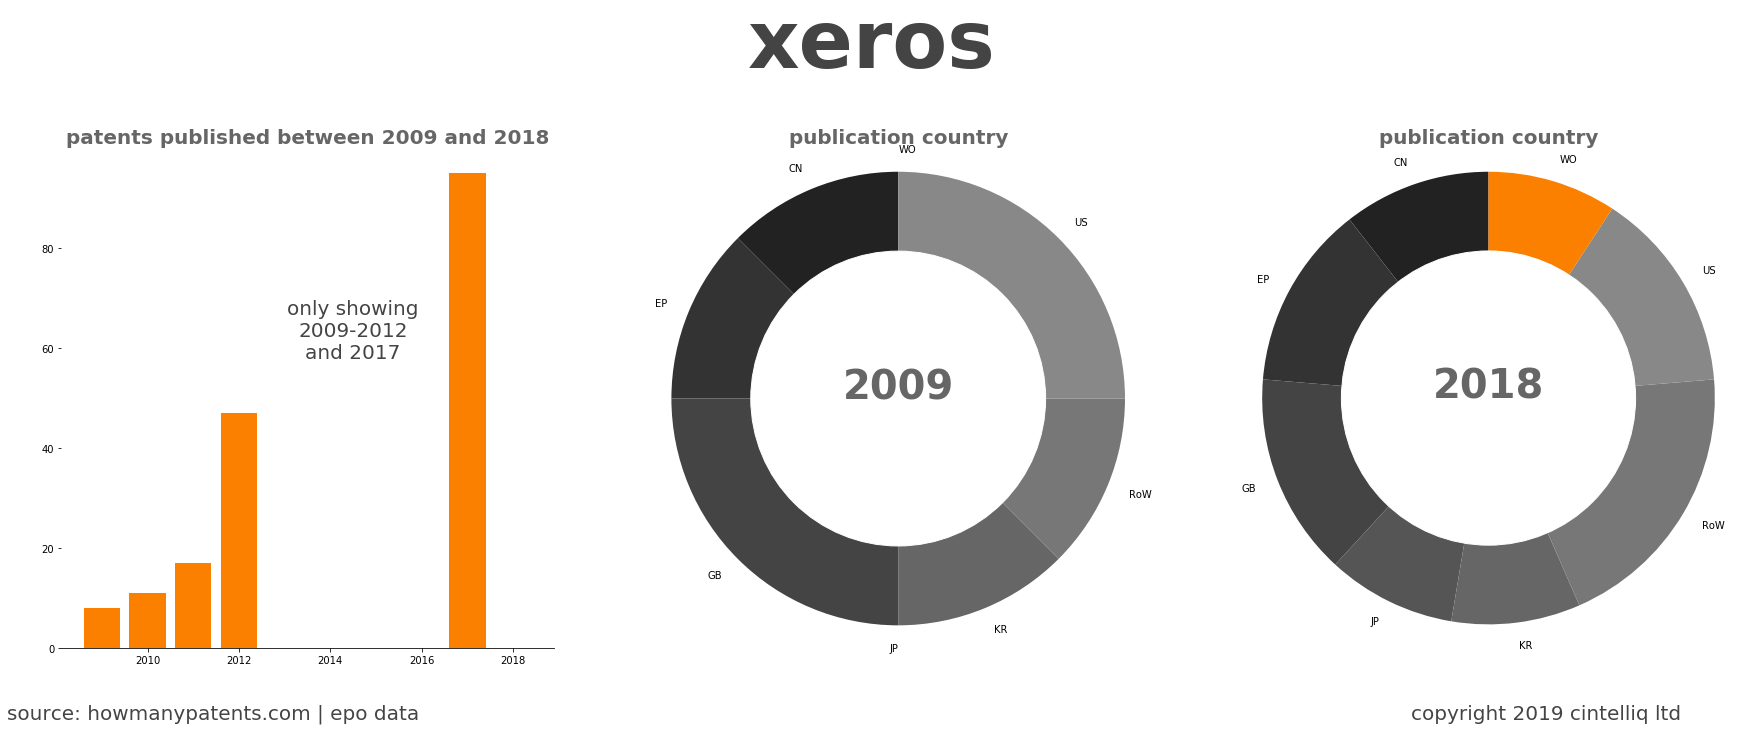 summary of patents for Xeros